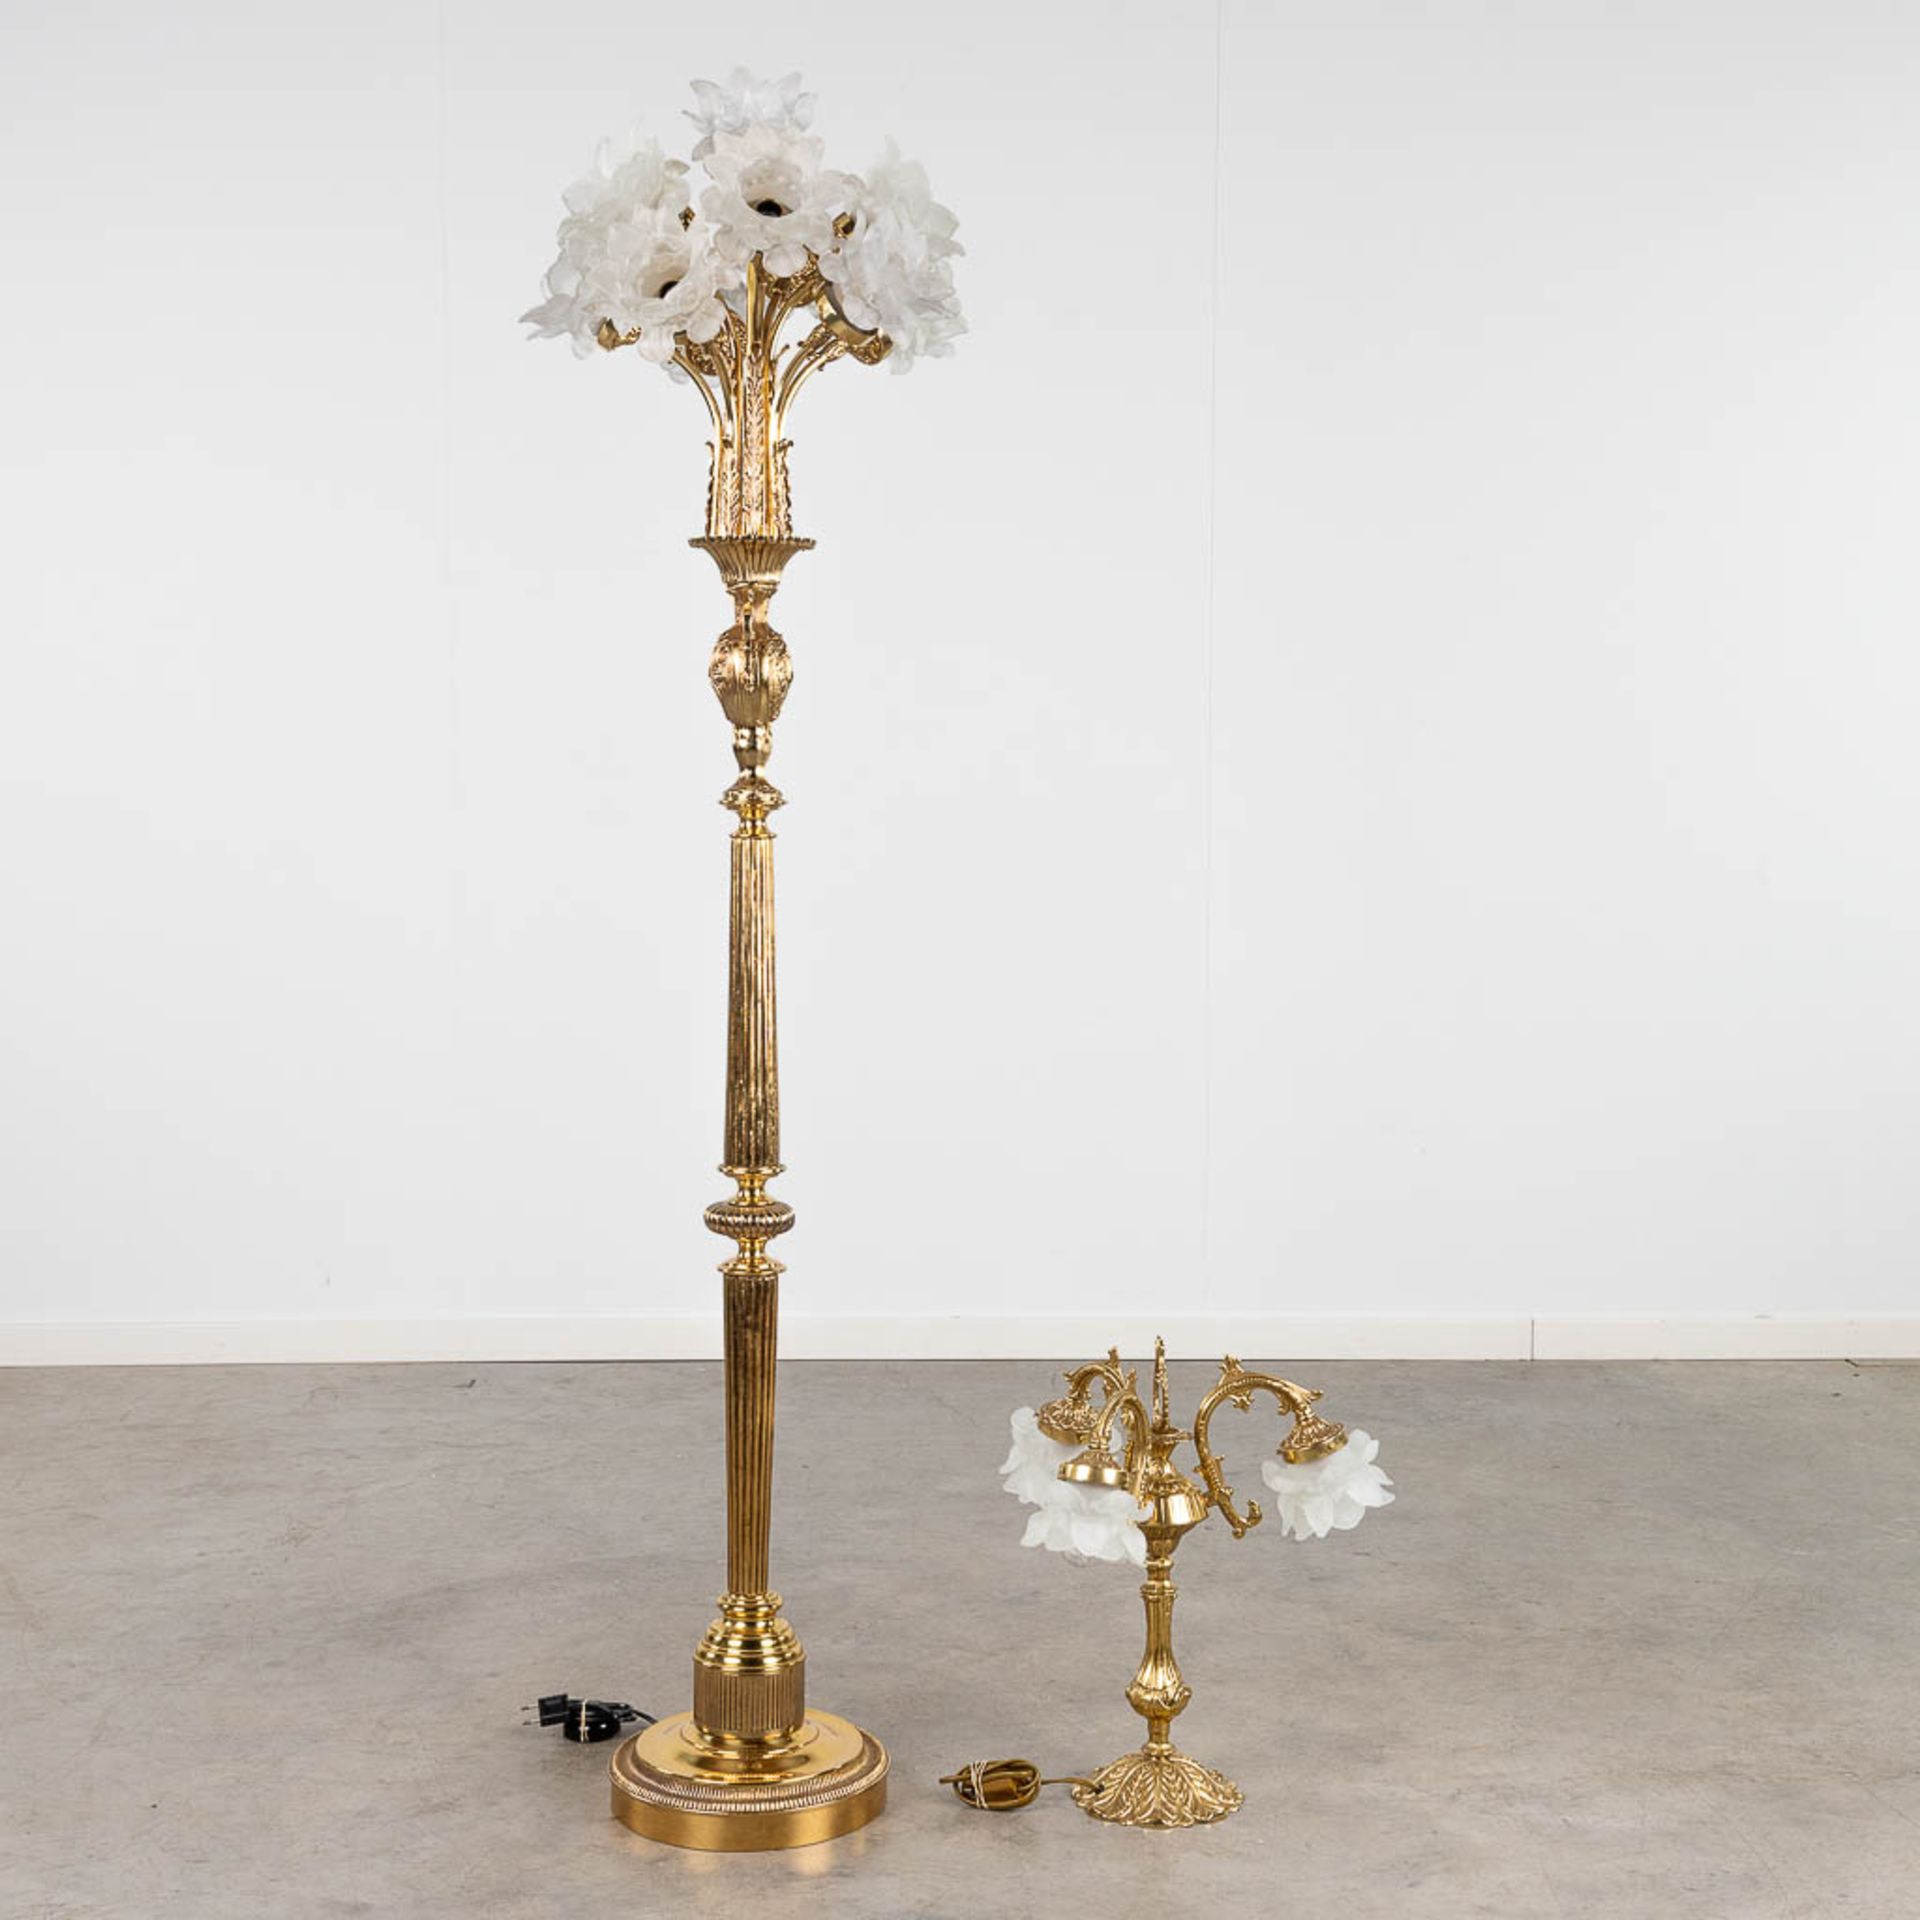 A decorative floor lamp and table lamp, brass, decorated with glass. 20th C. (H: 167 x D: 47 cm) - Image 5 of 13